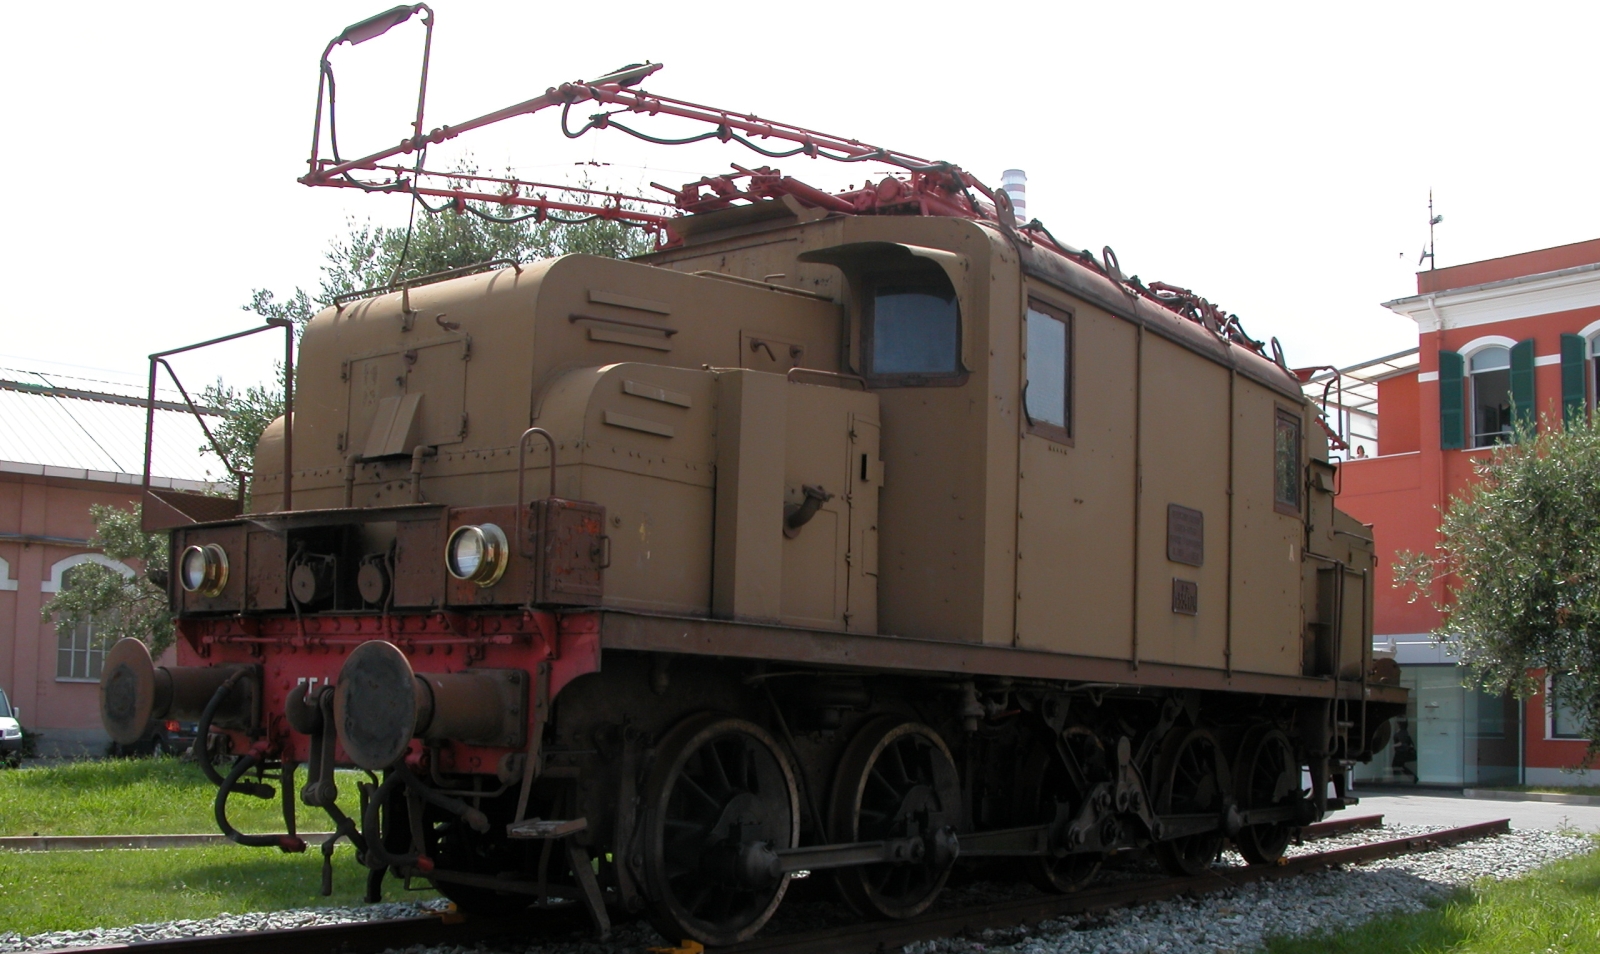 E.554.174 on display at the former factory of Tecnomasio Italiano Brown Boveri, now Bombardier, in June 2012